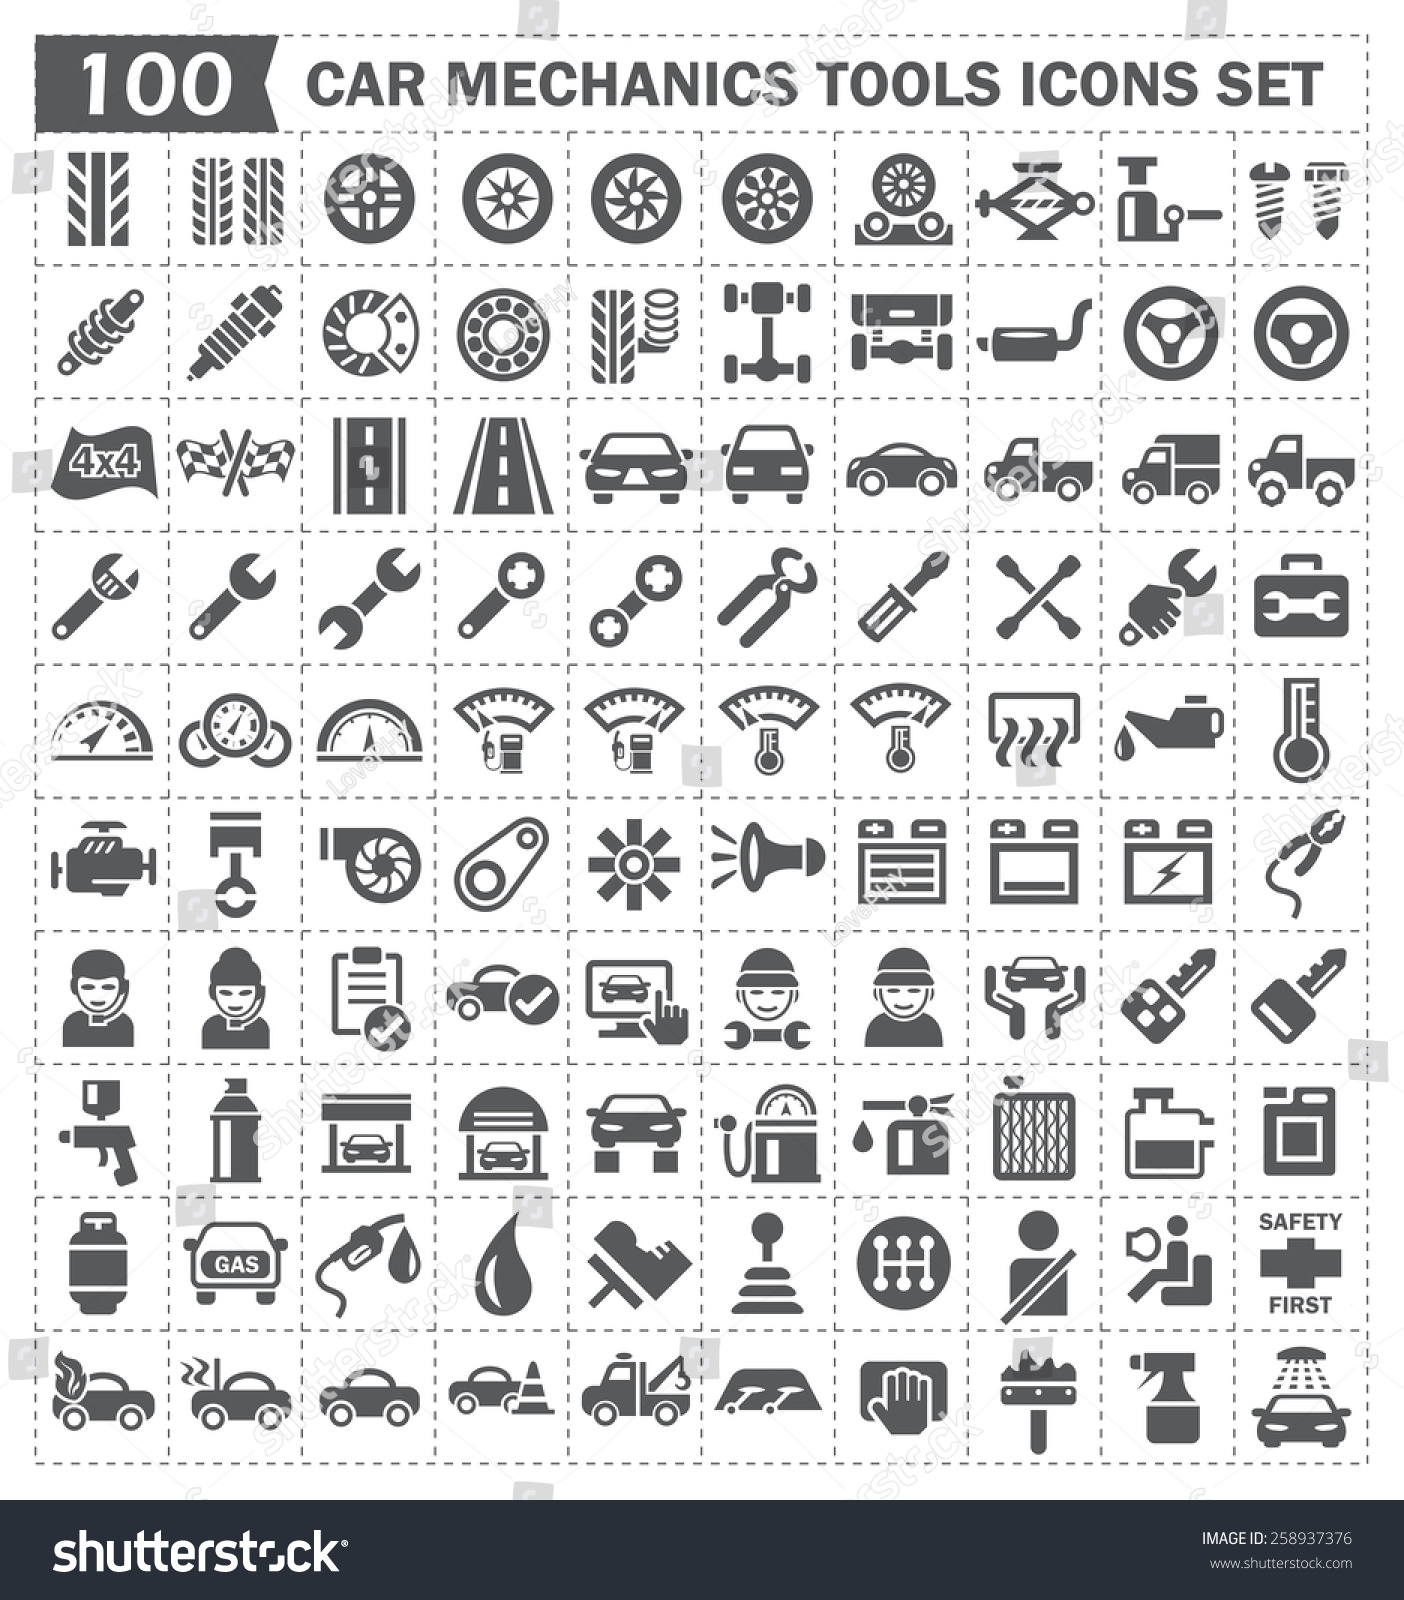 SVG of Car mechanic tool and automotive icon. Consist of service and repair work. Including spare part i.e. engine, battery, transmission, piston, tire, steering etc. For garage and shop and logo element. svg